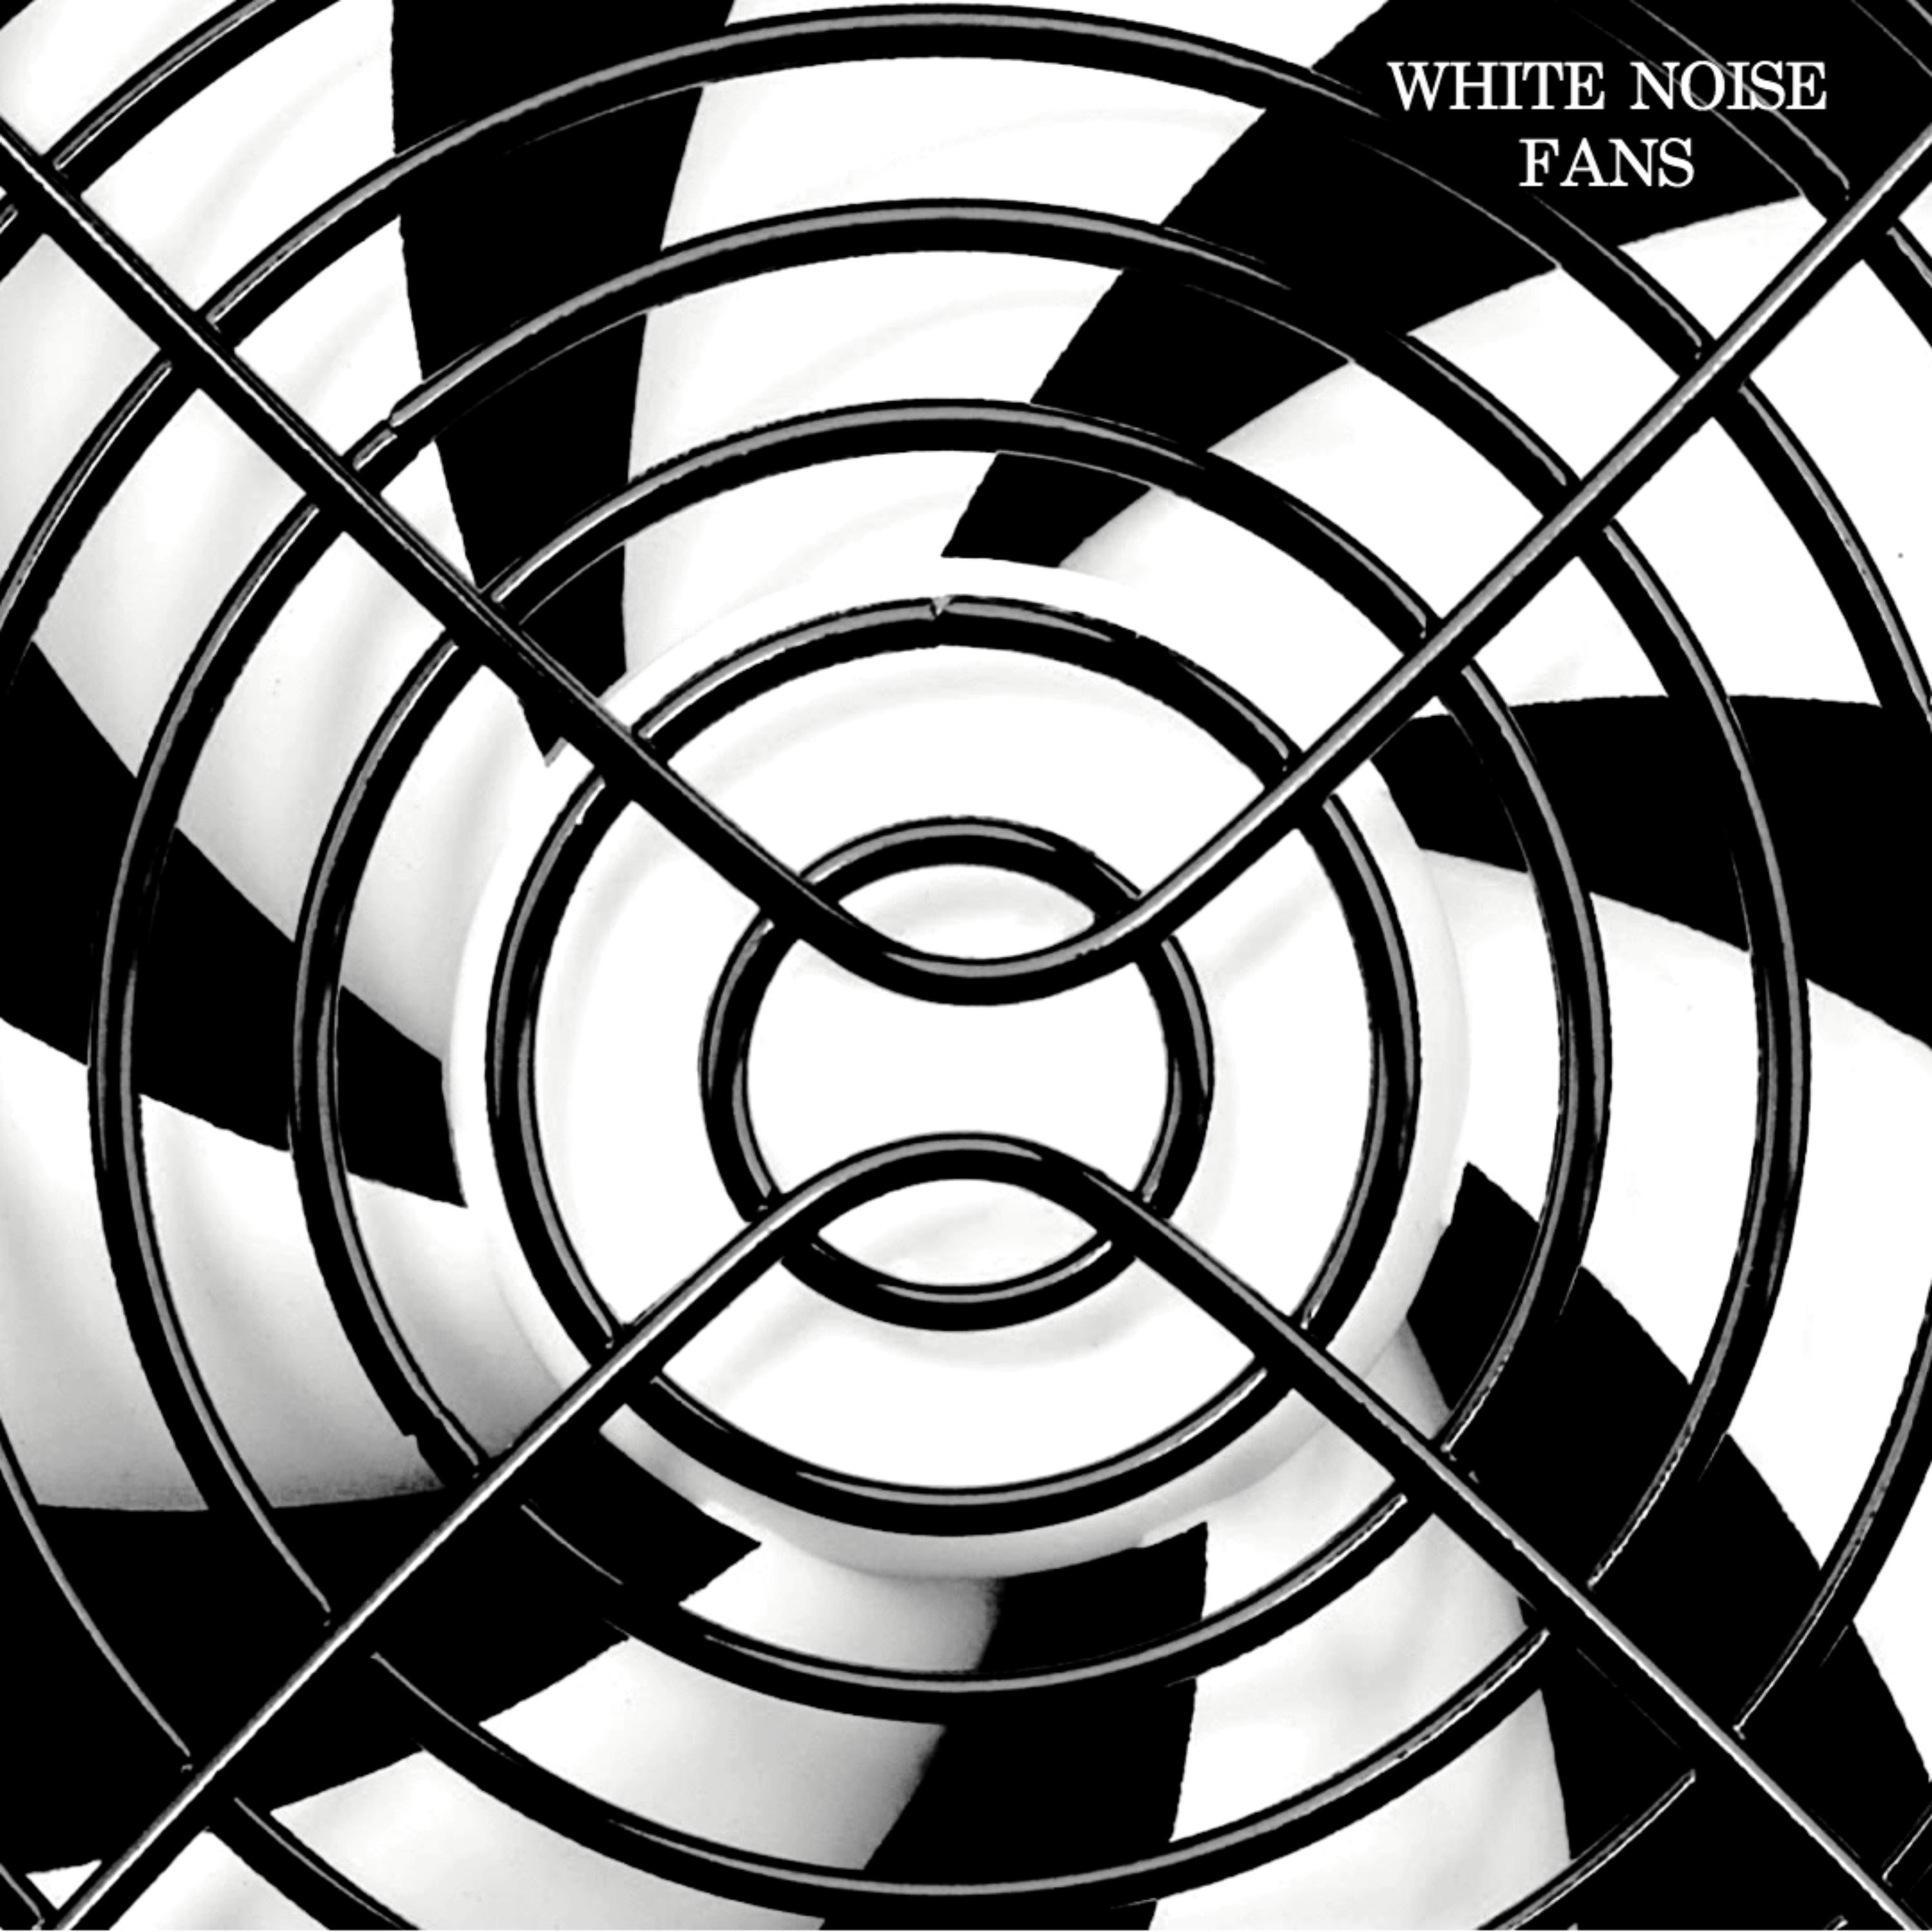 White Noise: Air Conditioning